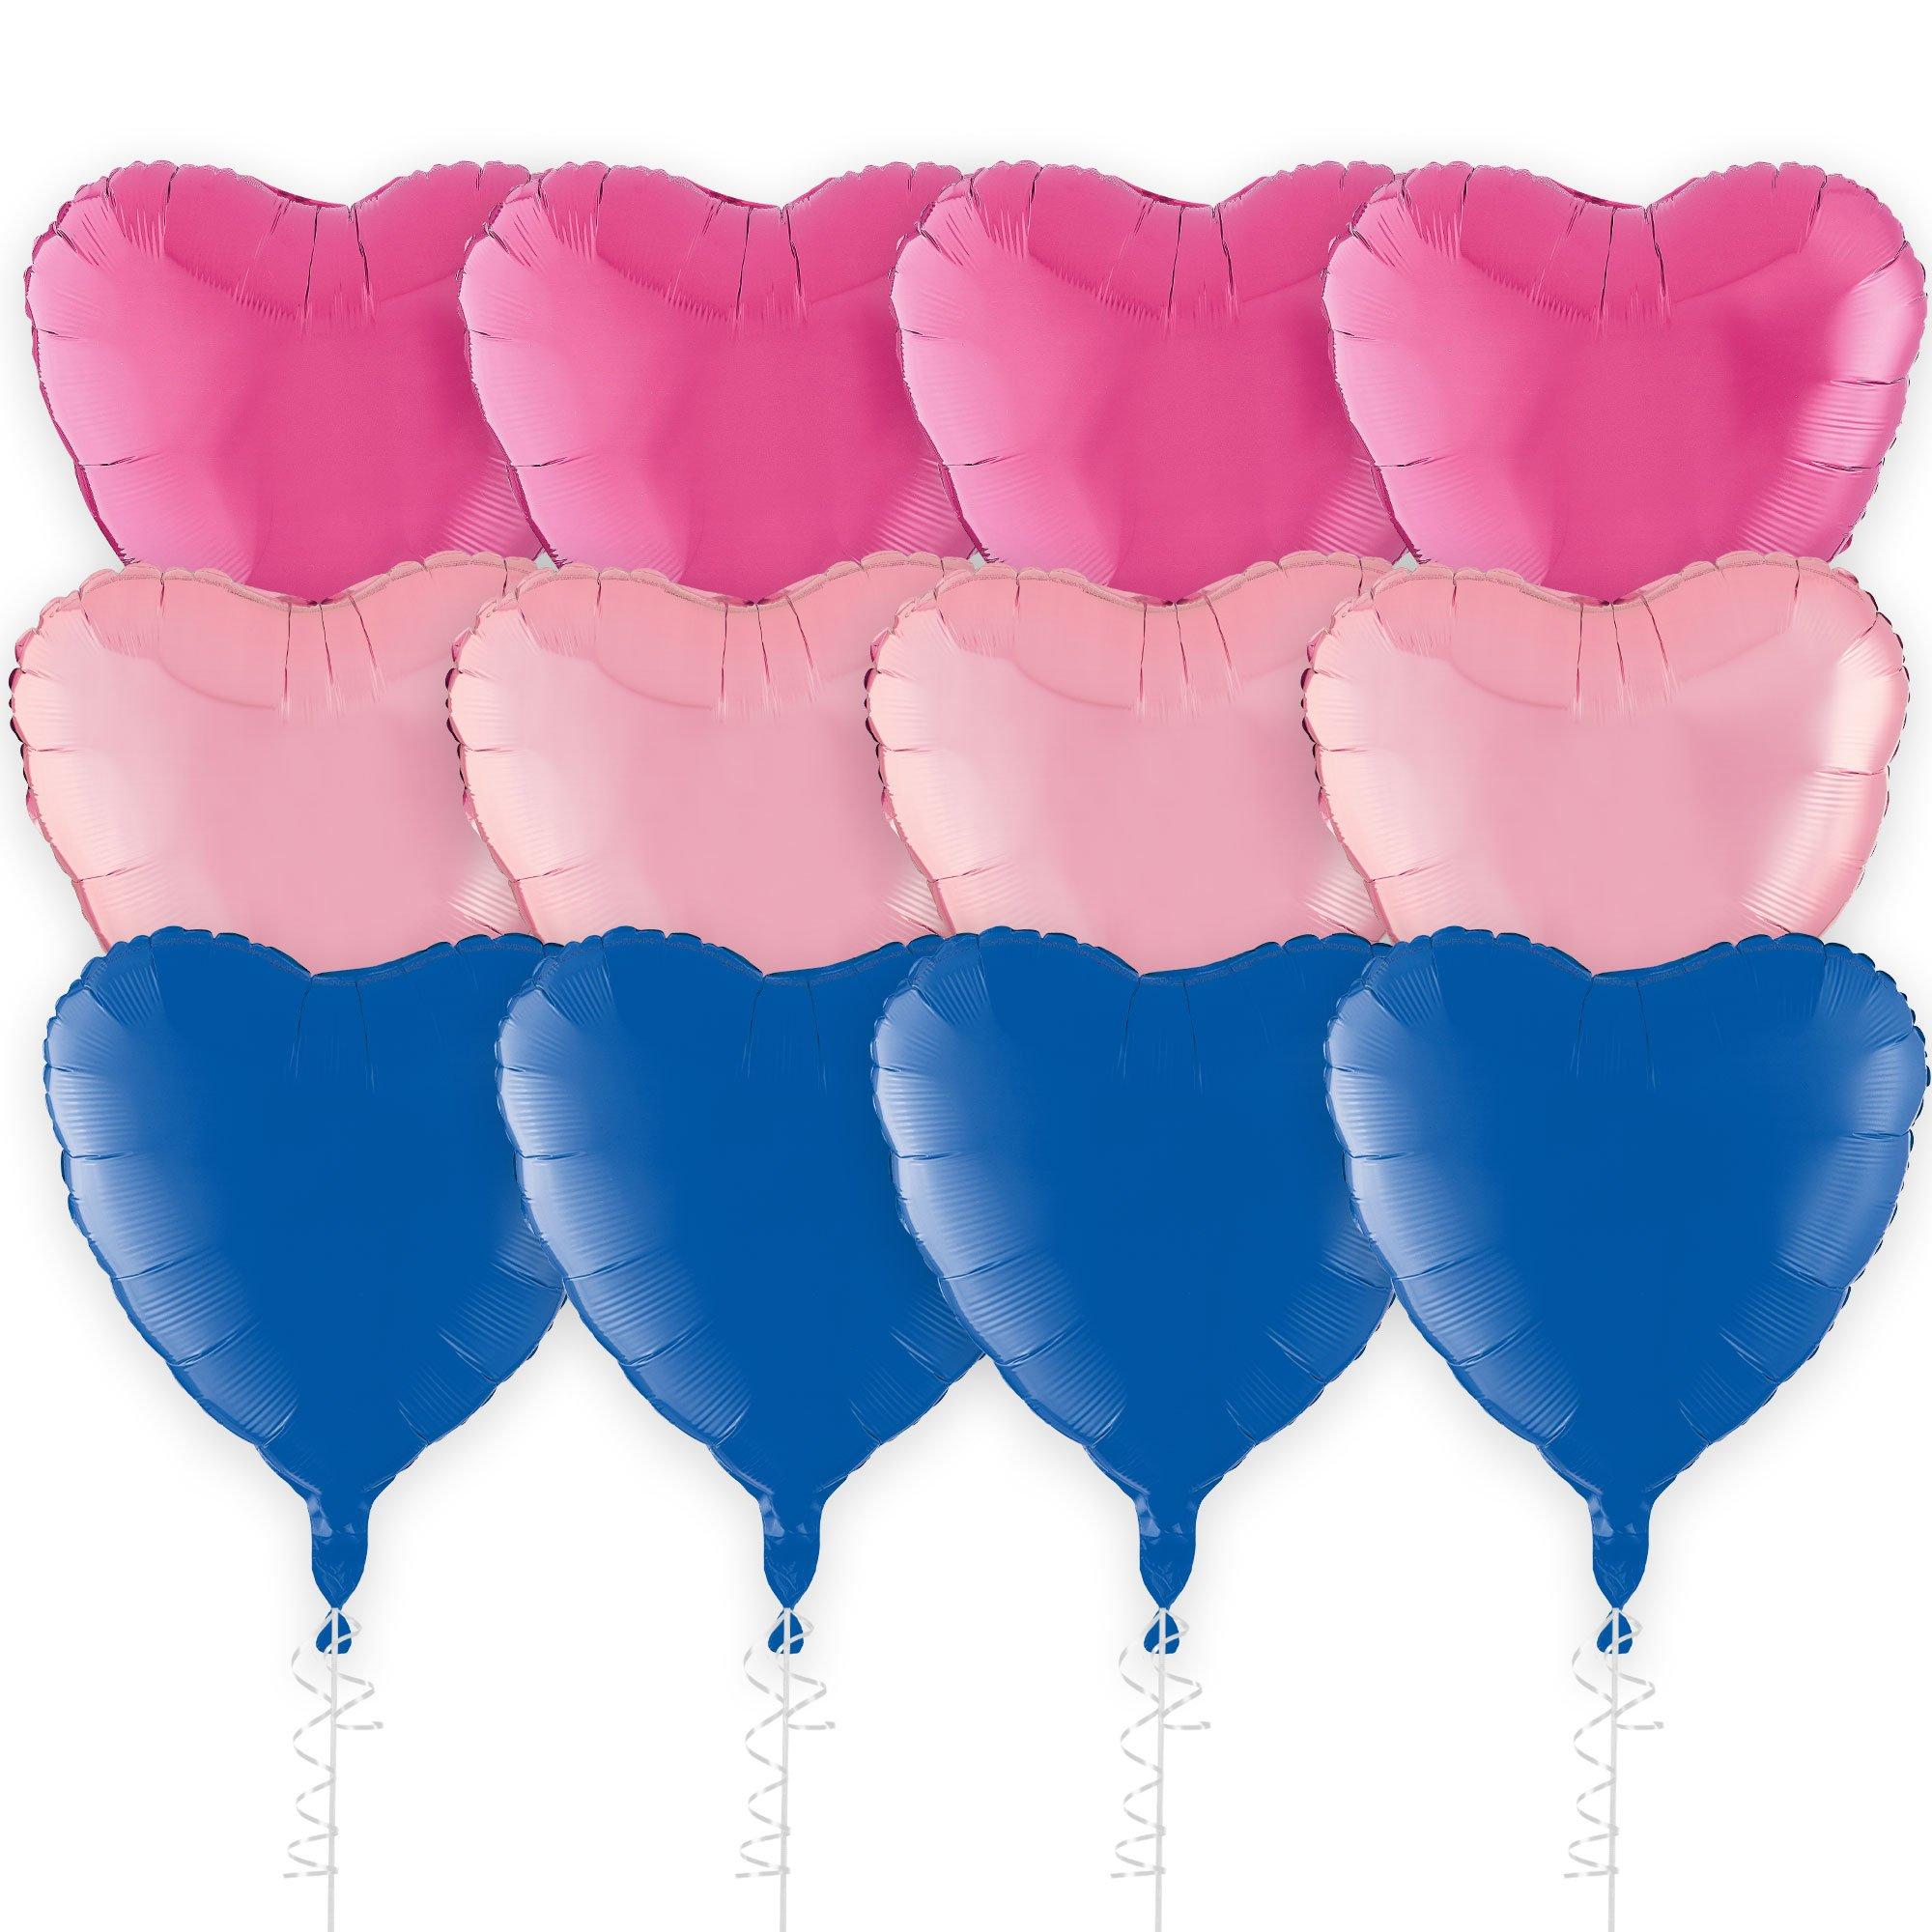 Bi Hearts & Pride Flag Foil Balloon Bouquet with Balloon Weight, 14pc